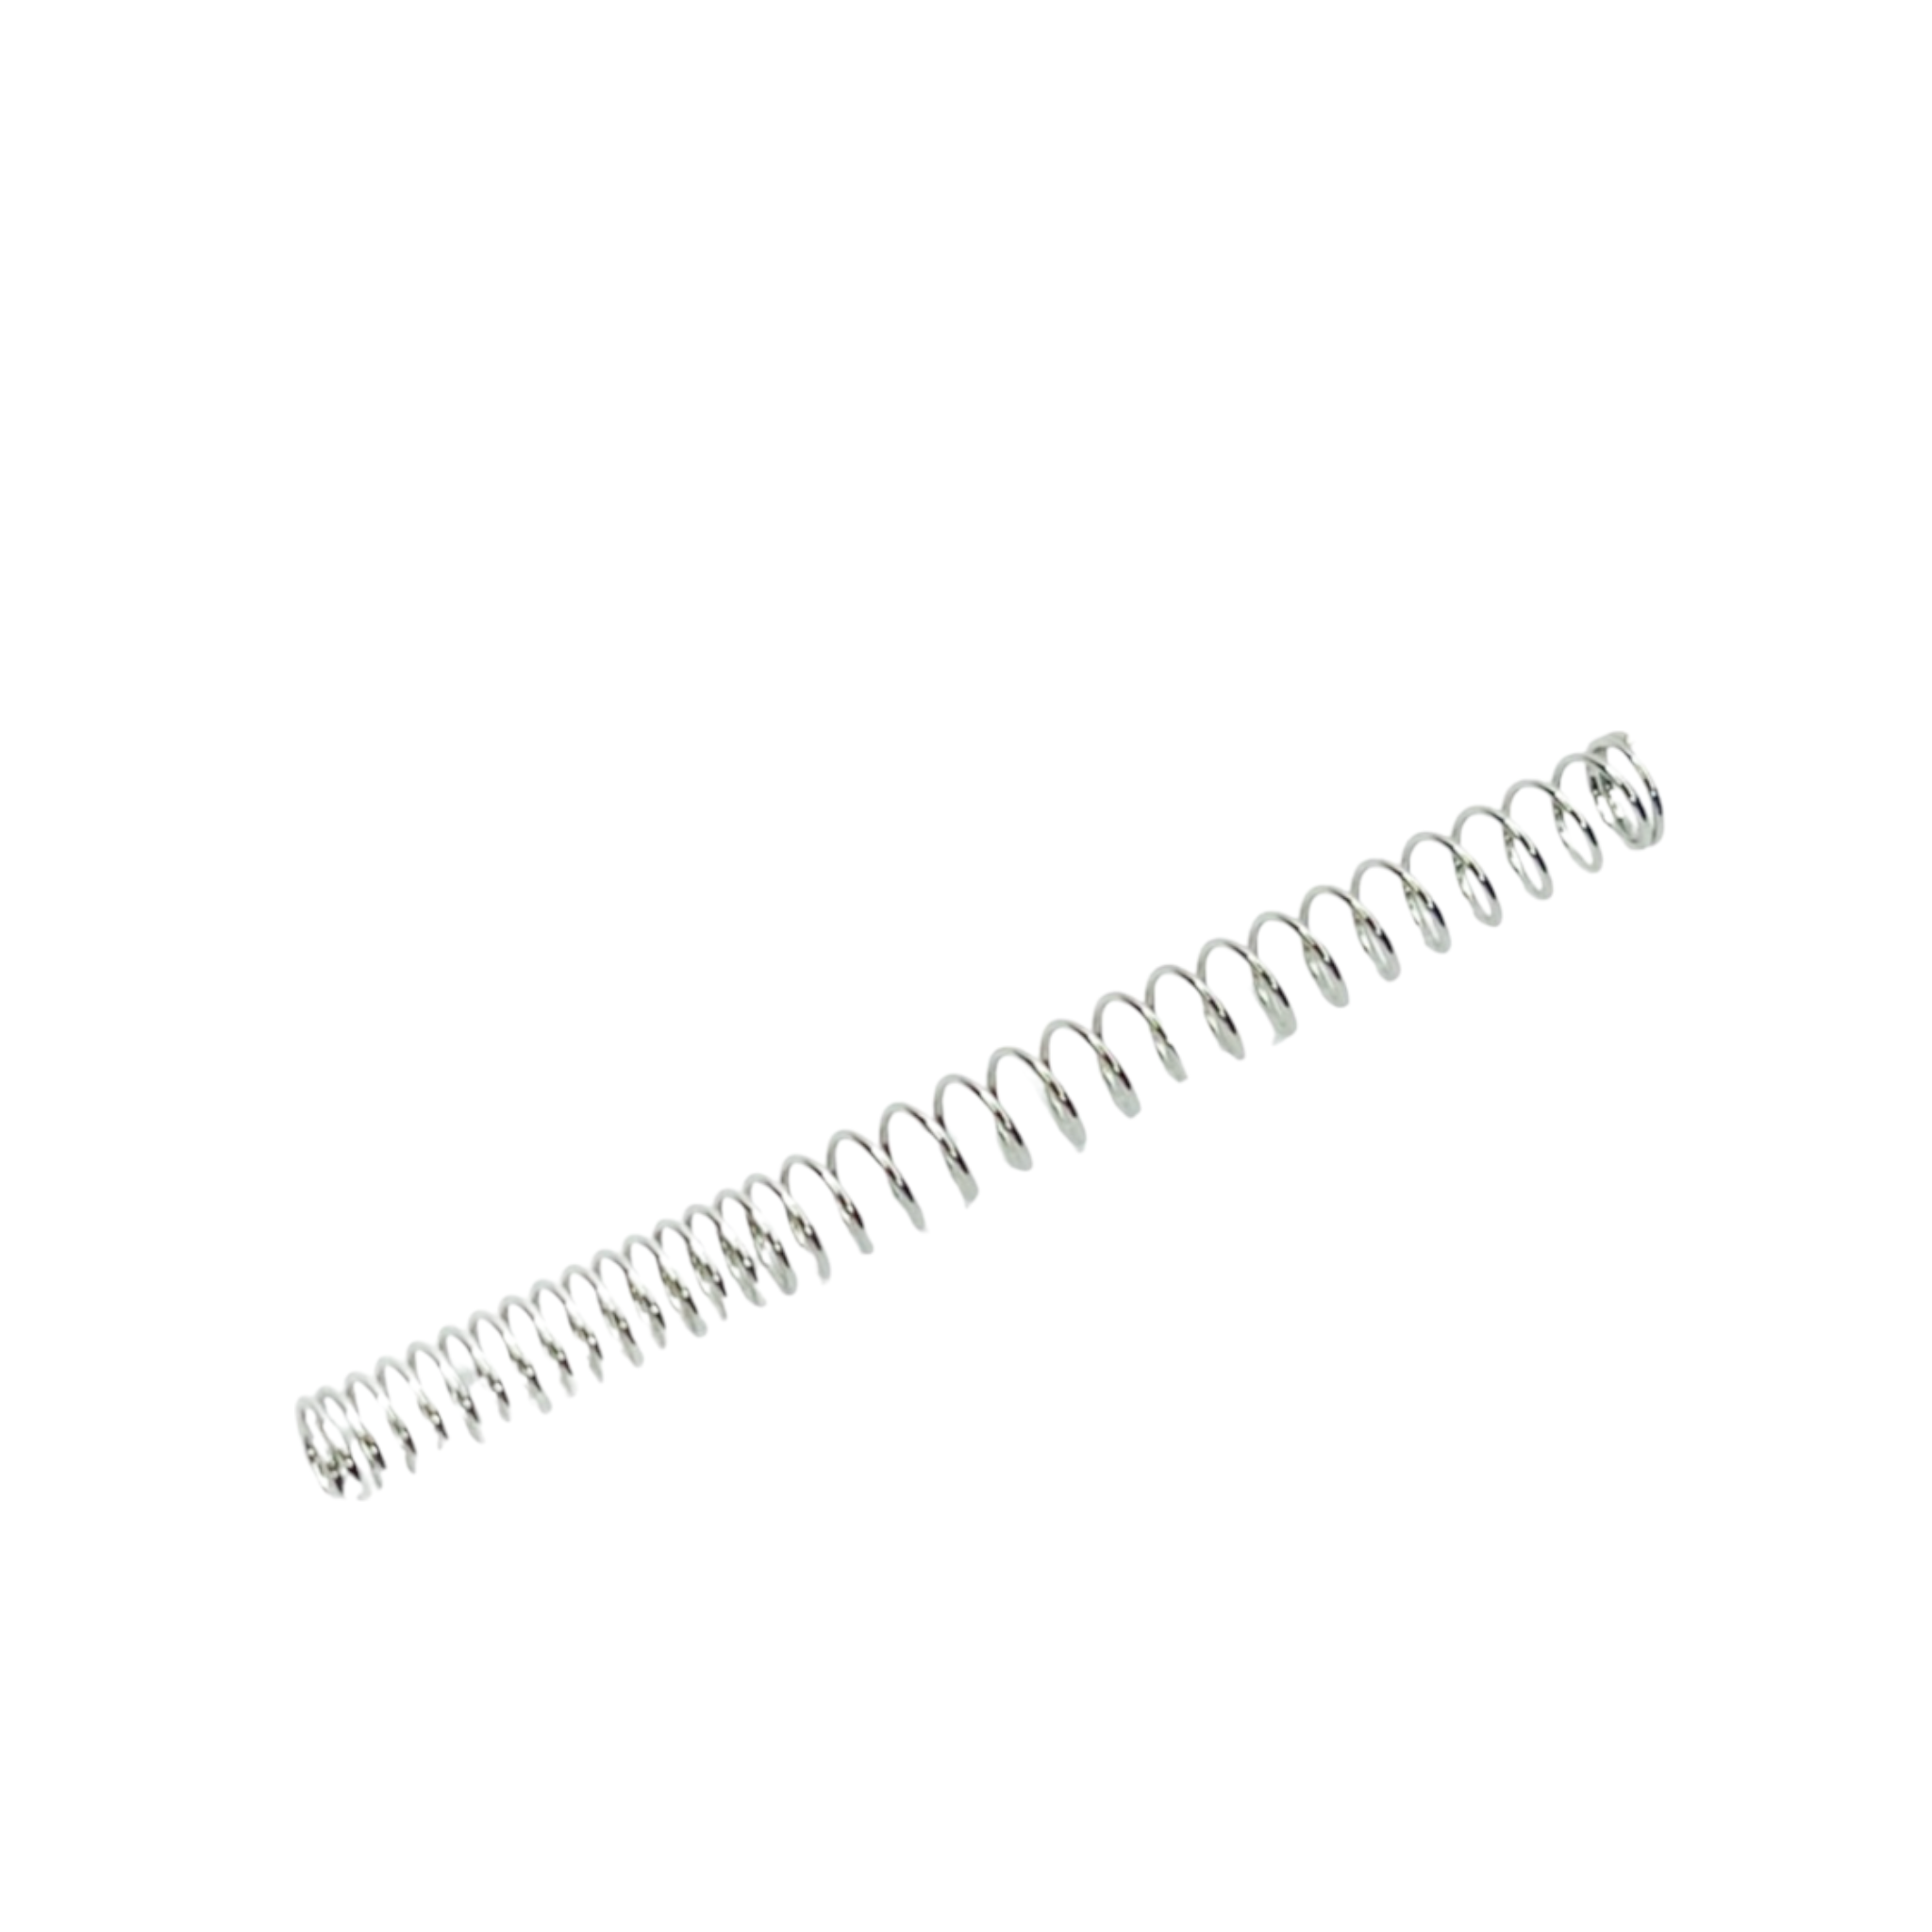 AAP-01/C 160% Non-linear performance spring (German piano wire)